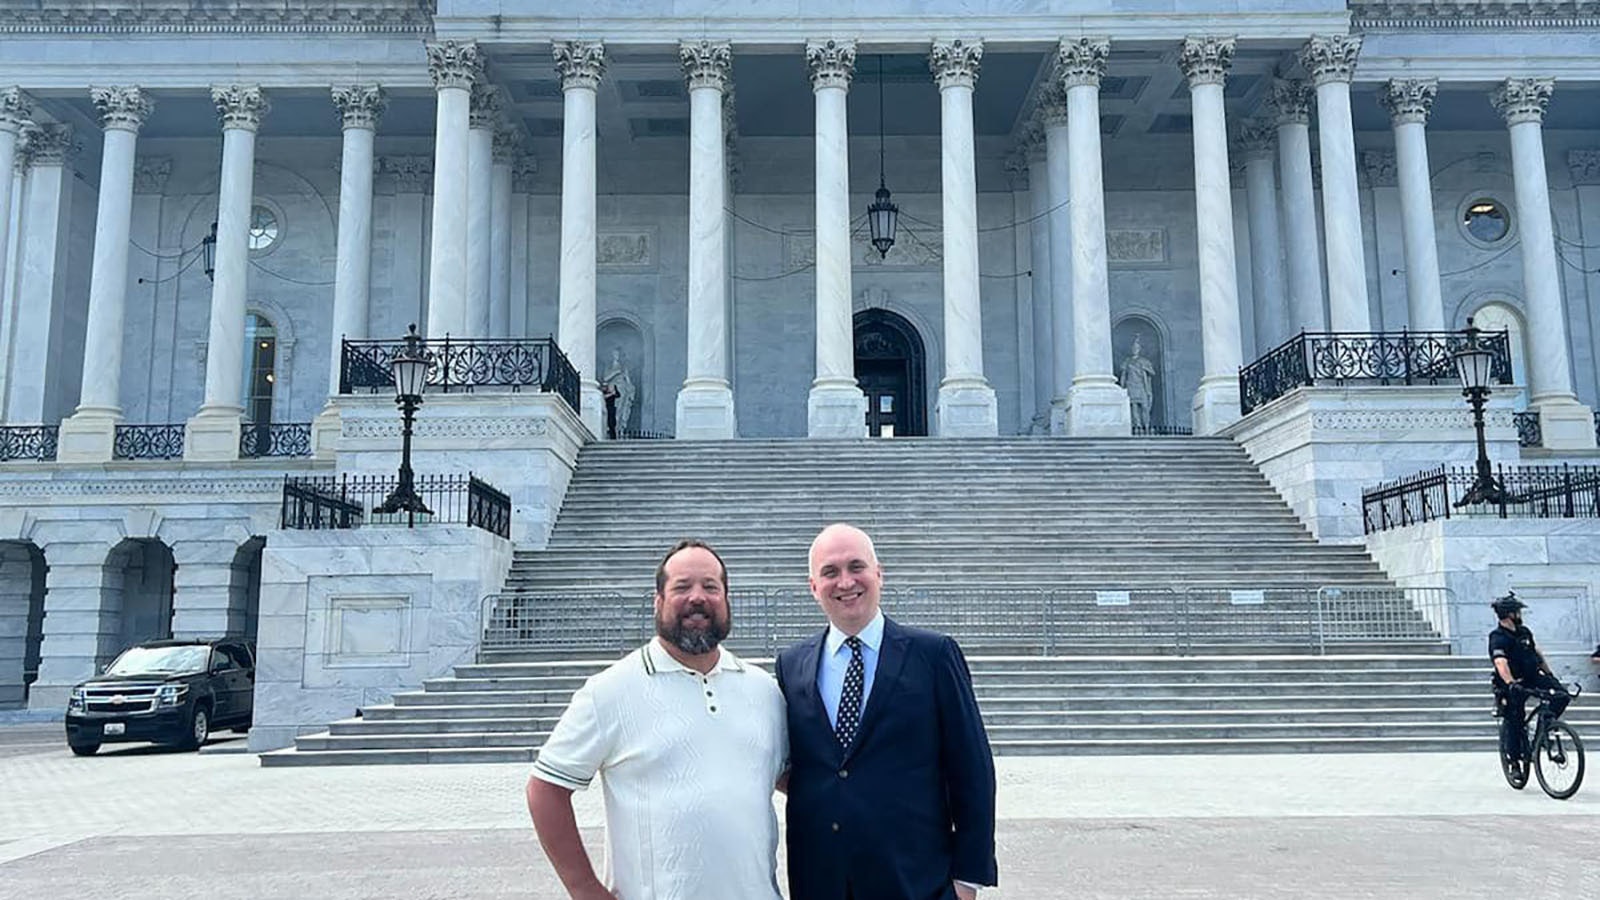 Cody resident Nick Piazza spent time earlier this month lobbying lawmakers on Capitol Hill to support a spending package to continue to assist Ukraine in its war with Russia.